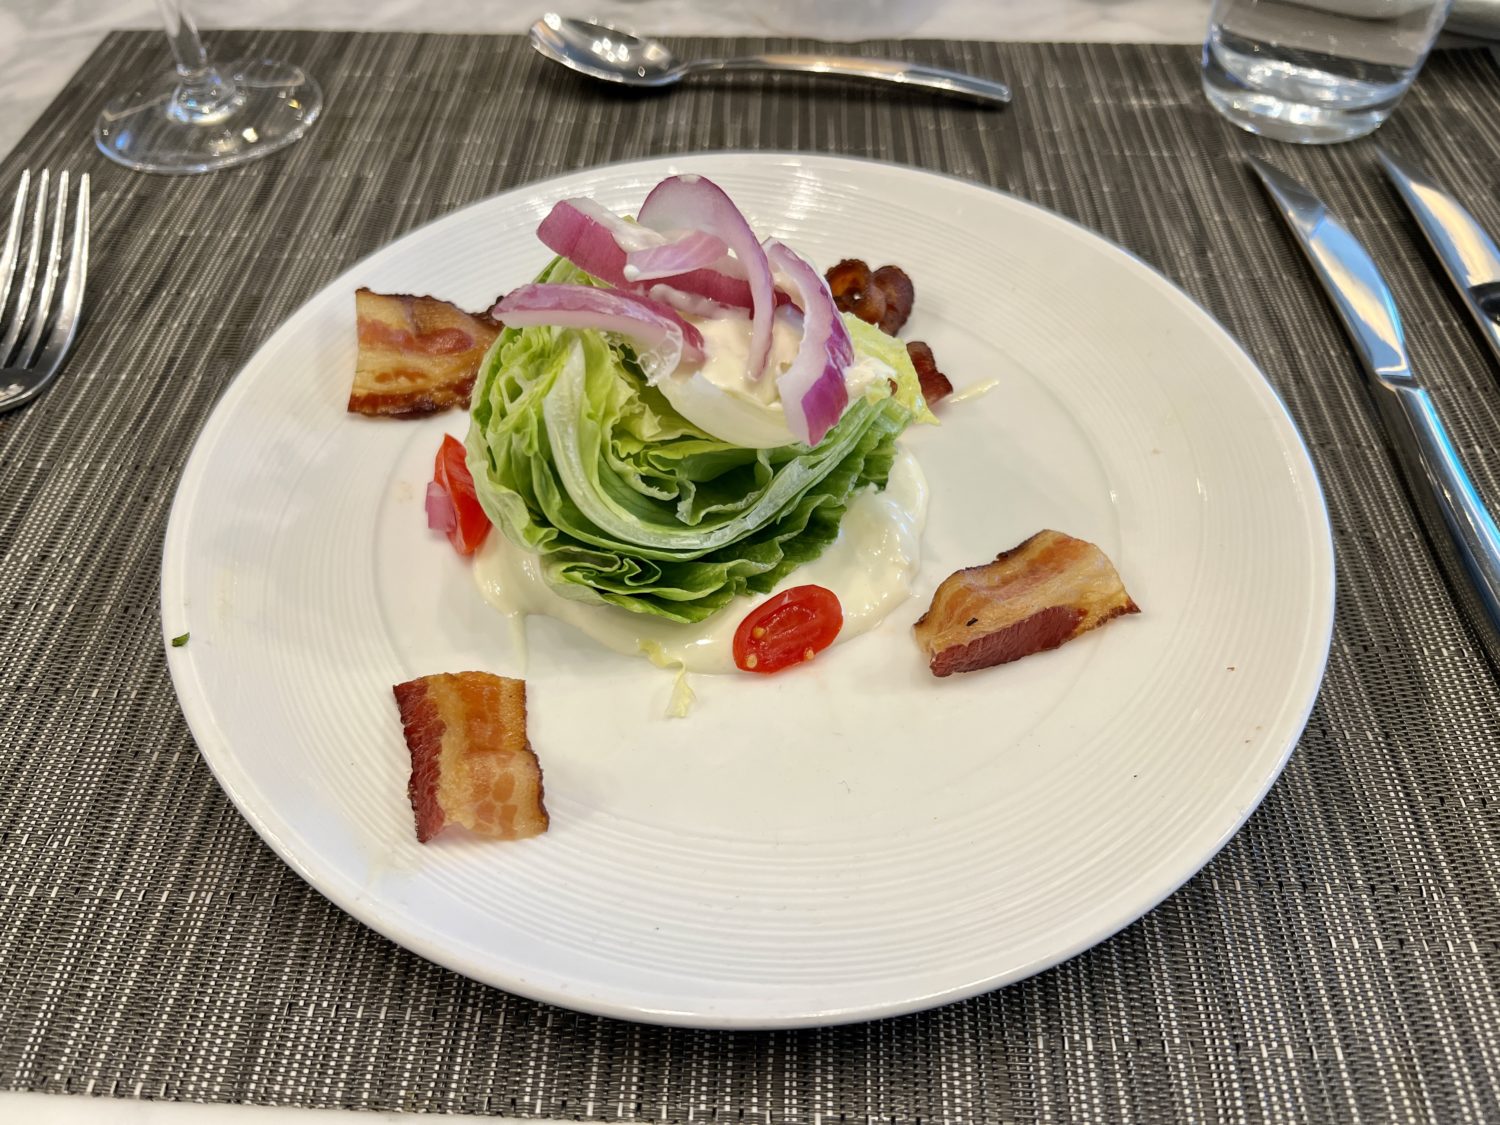 salad at united polaris lounge chicago  Review: United Polaris Lounge Chicago (ORD) &#8211; Thrifty Traveler united polaris lounge chicago salad scaled